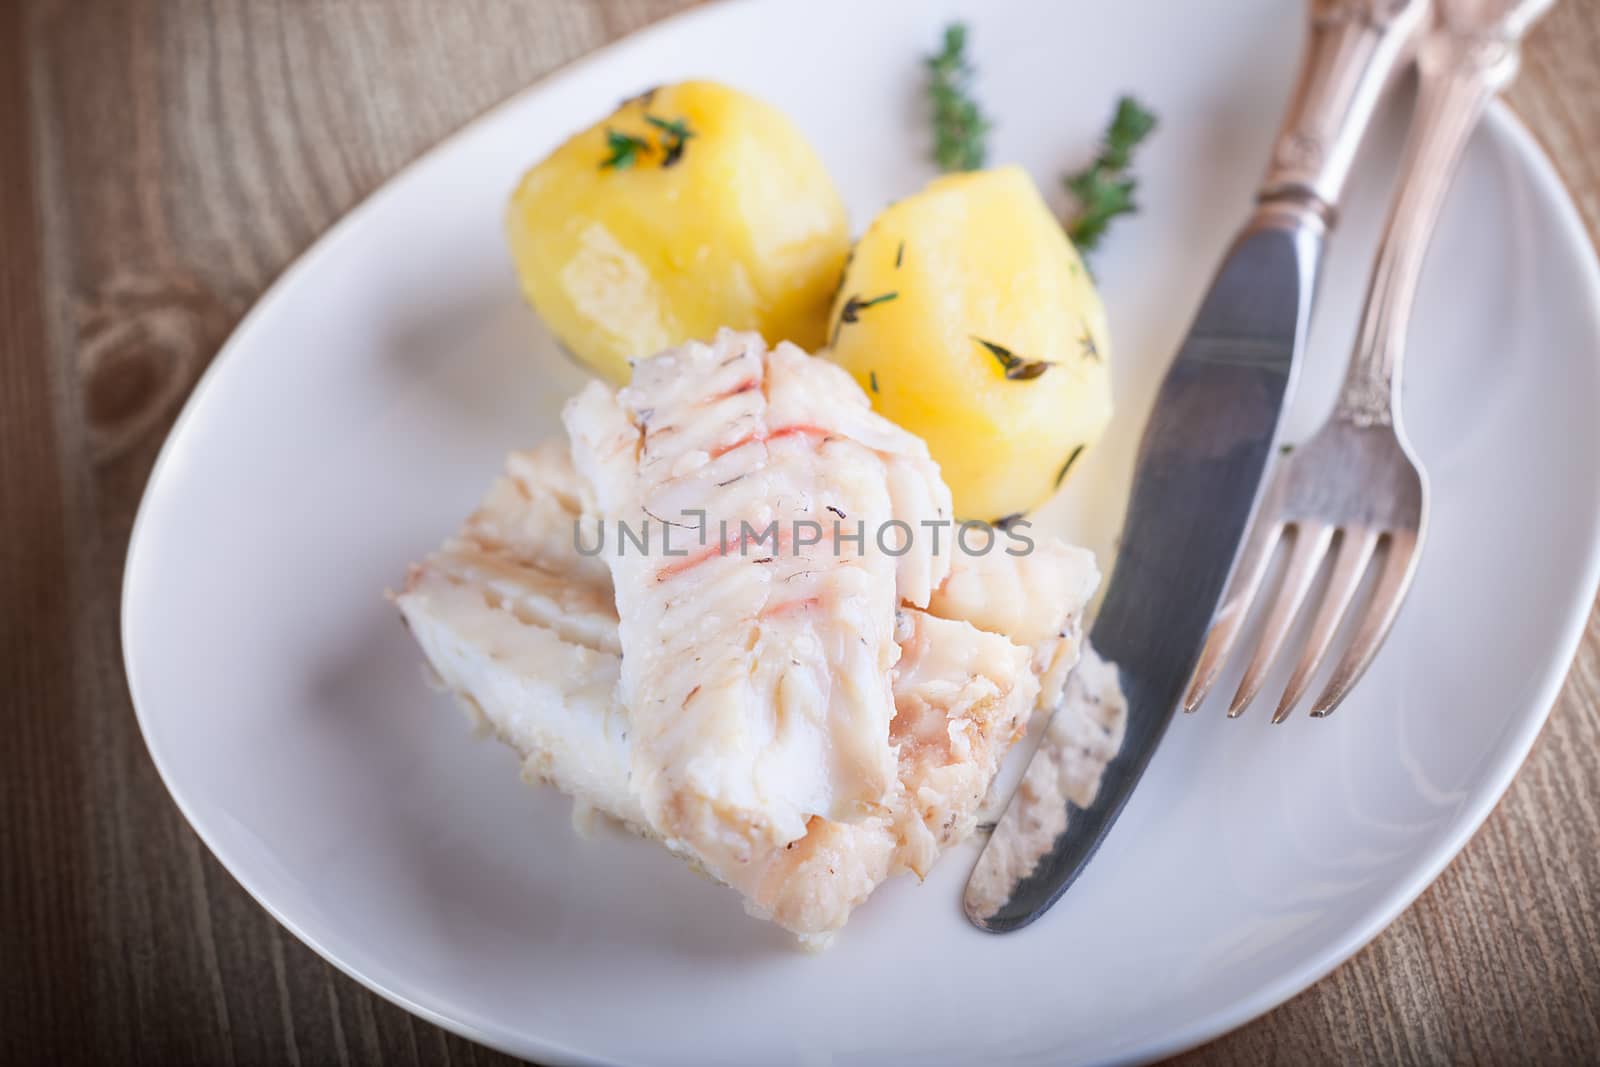 Steamed fish and potato on a plate served on plate